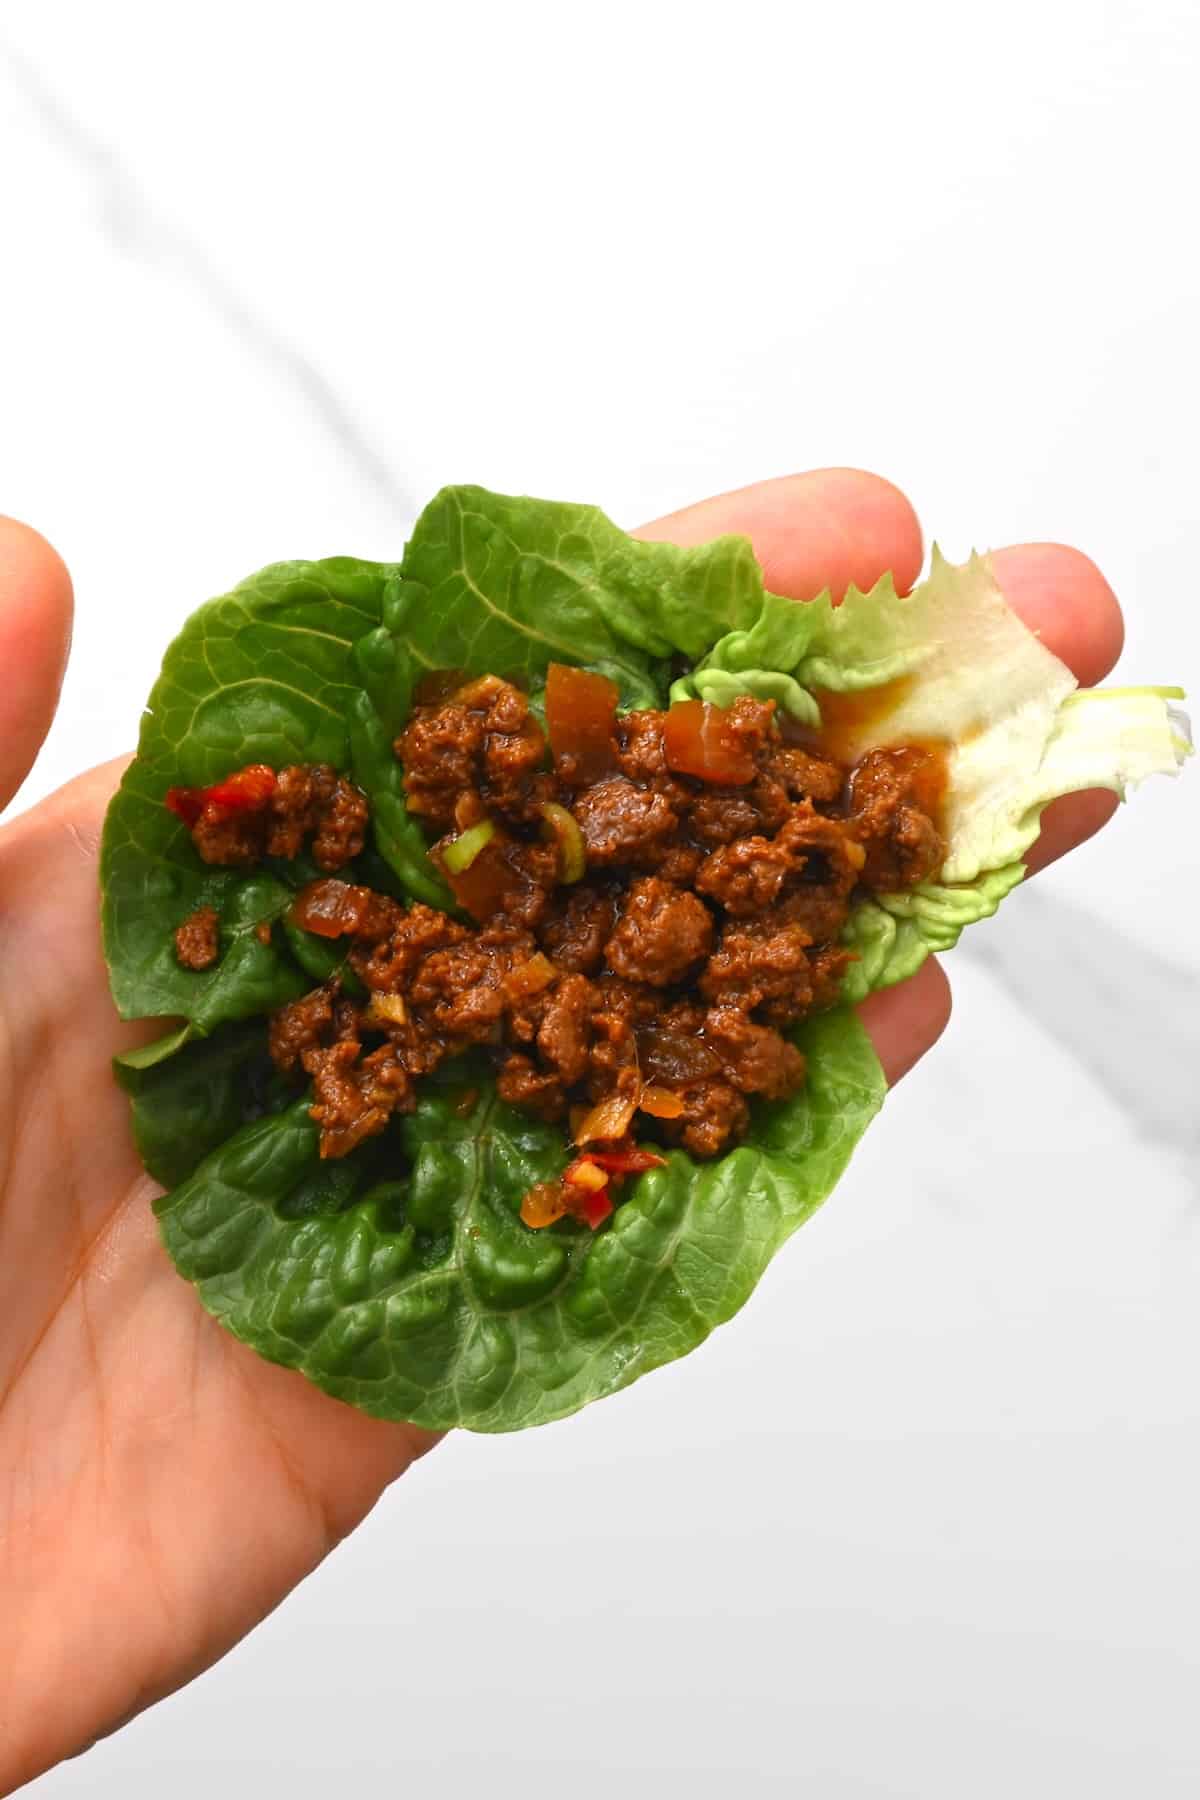 Hand holding a lettuce wrap with meat filling